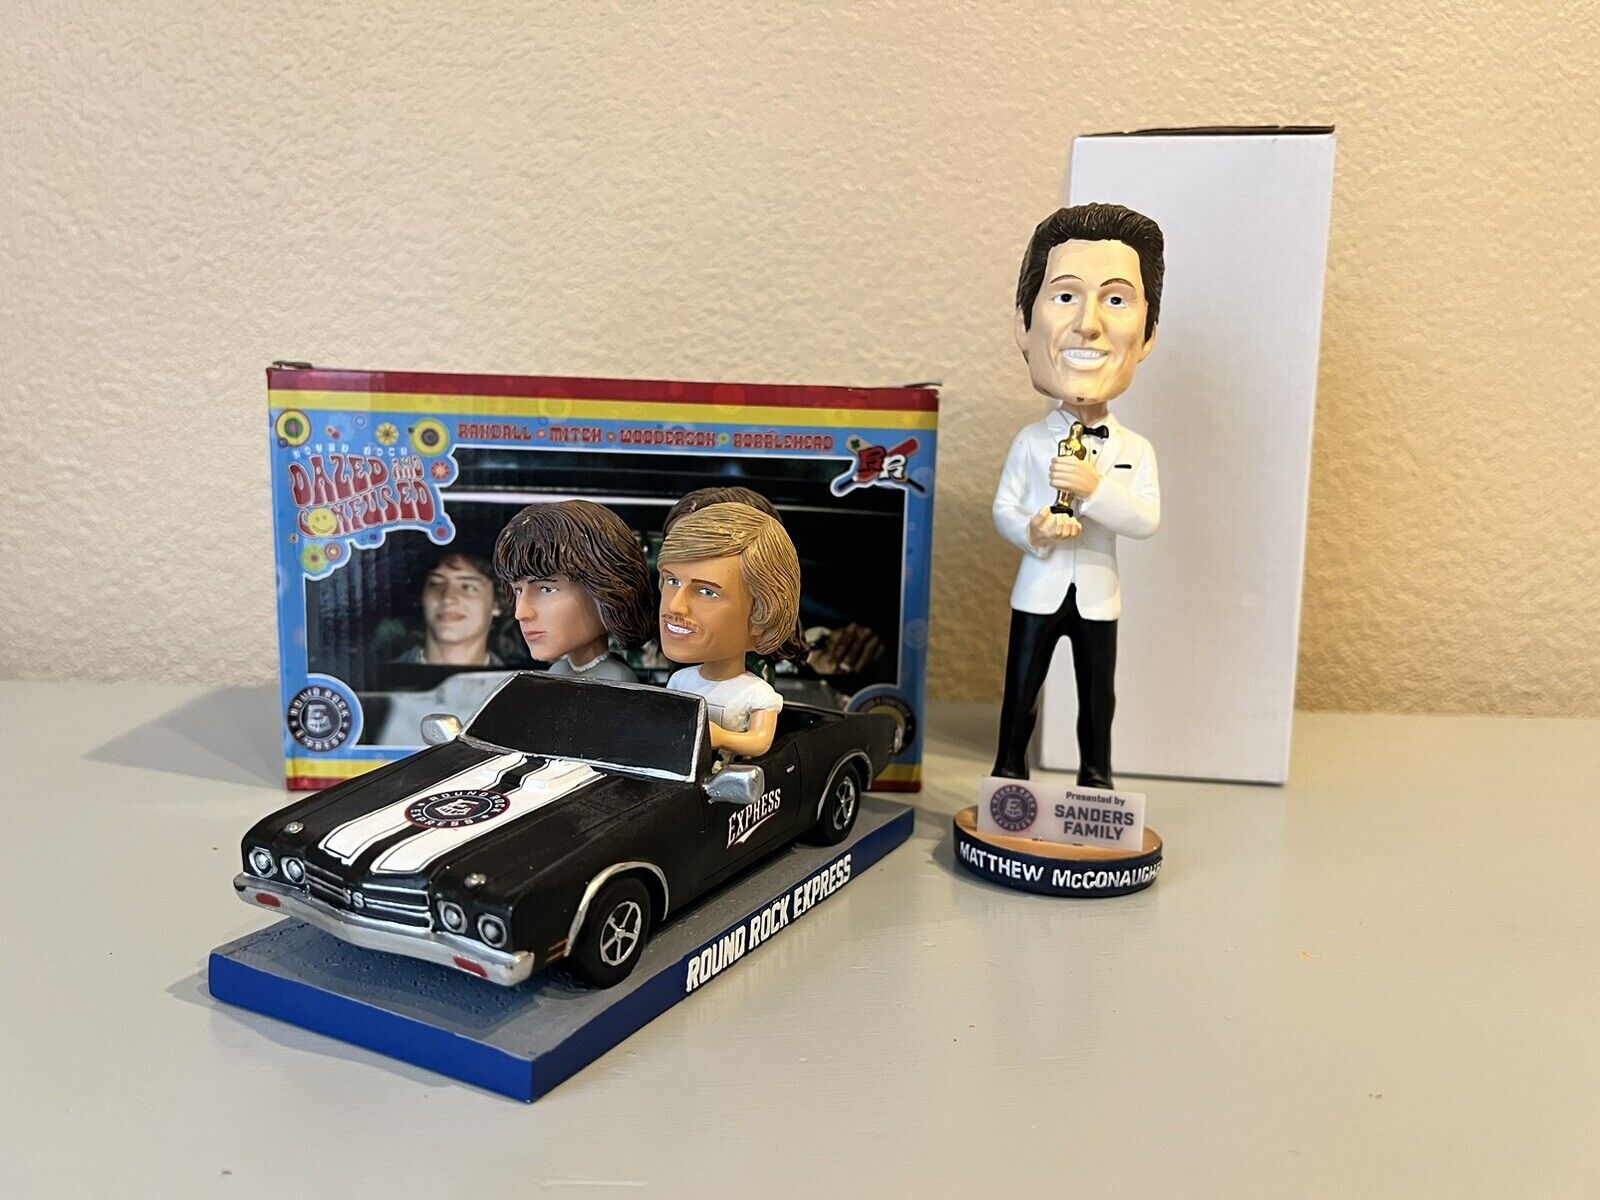 Dazed And Confused and Matthew McConaughey Bobble heads; Round Rock Express